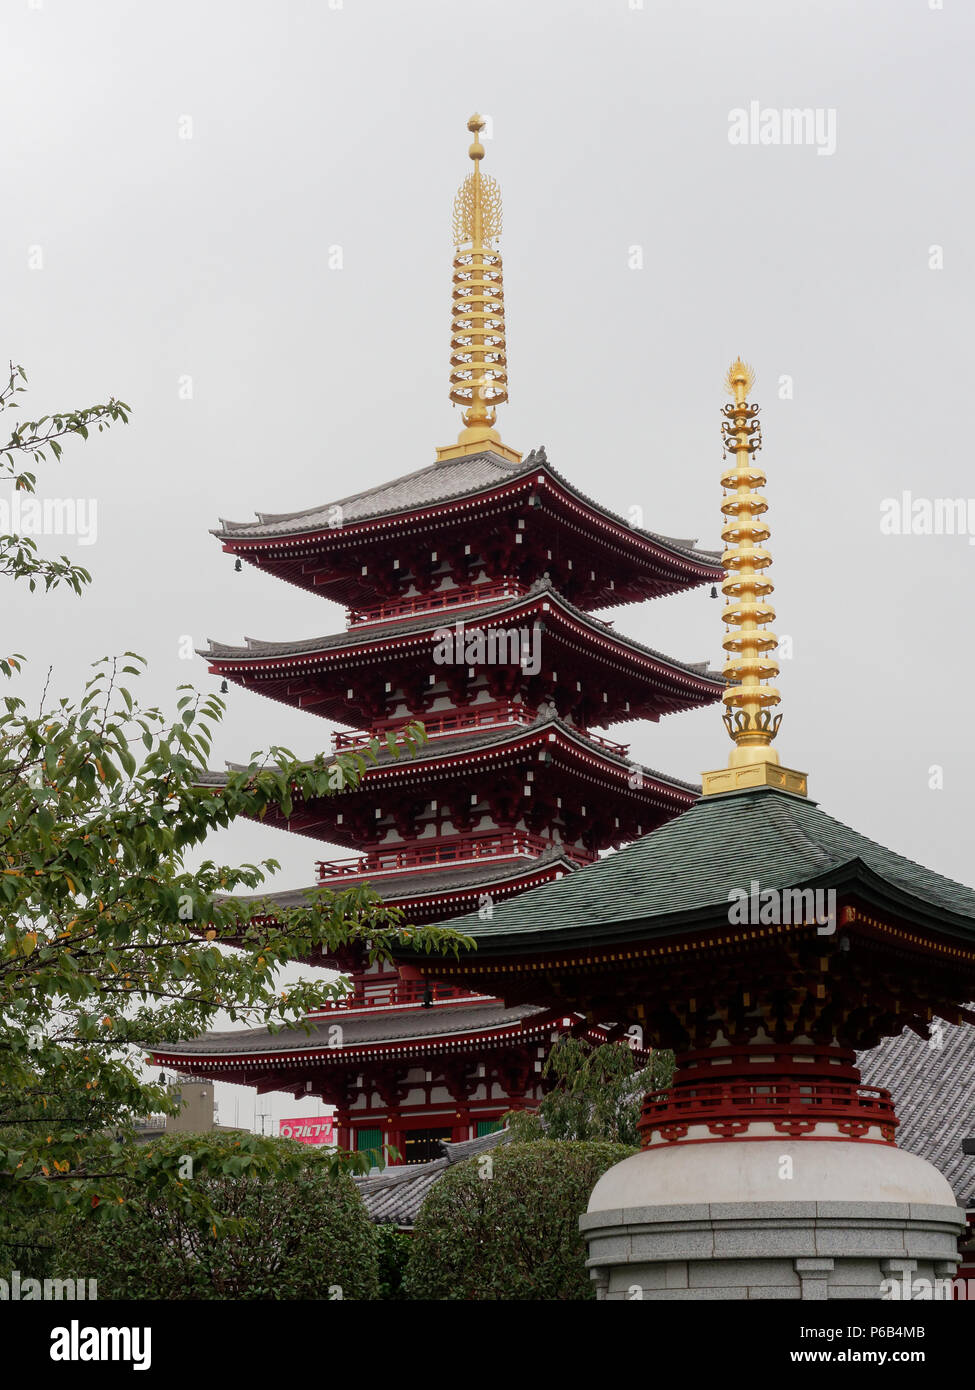 TOKYO, JAPAN - SEPTEMBER 28, 2017: 5 storied pagoda, one of the famous tourist destination in Senso-ji temple, over sky background with a small pagoda in the foreground Stock Photo